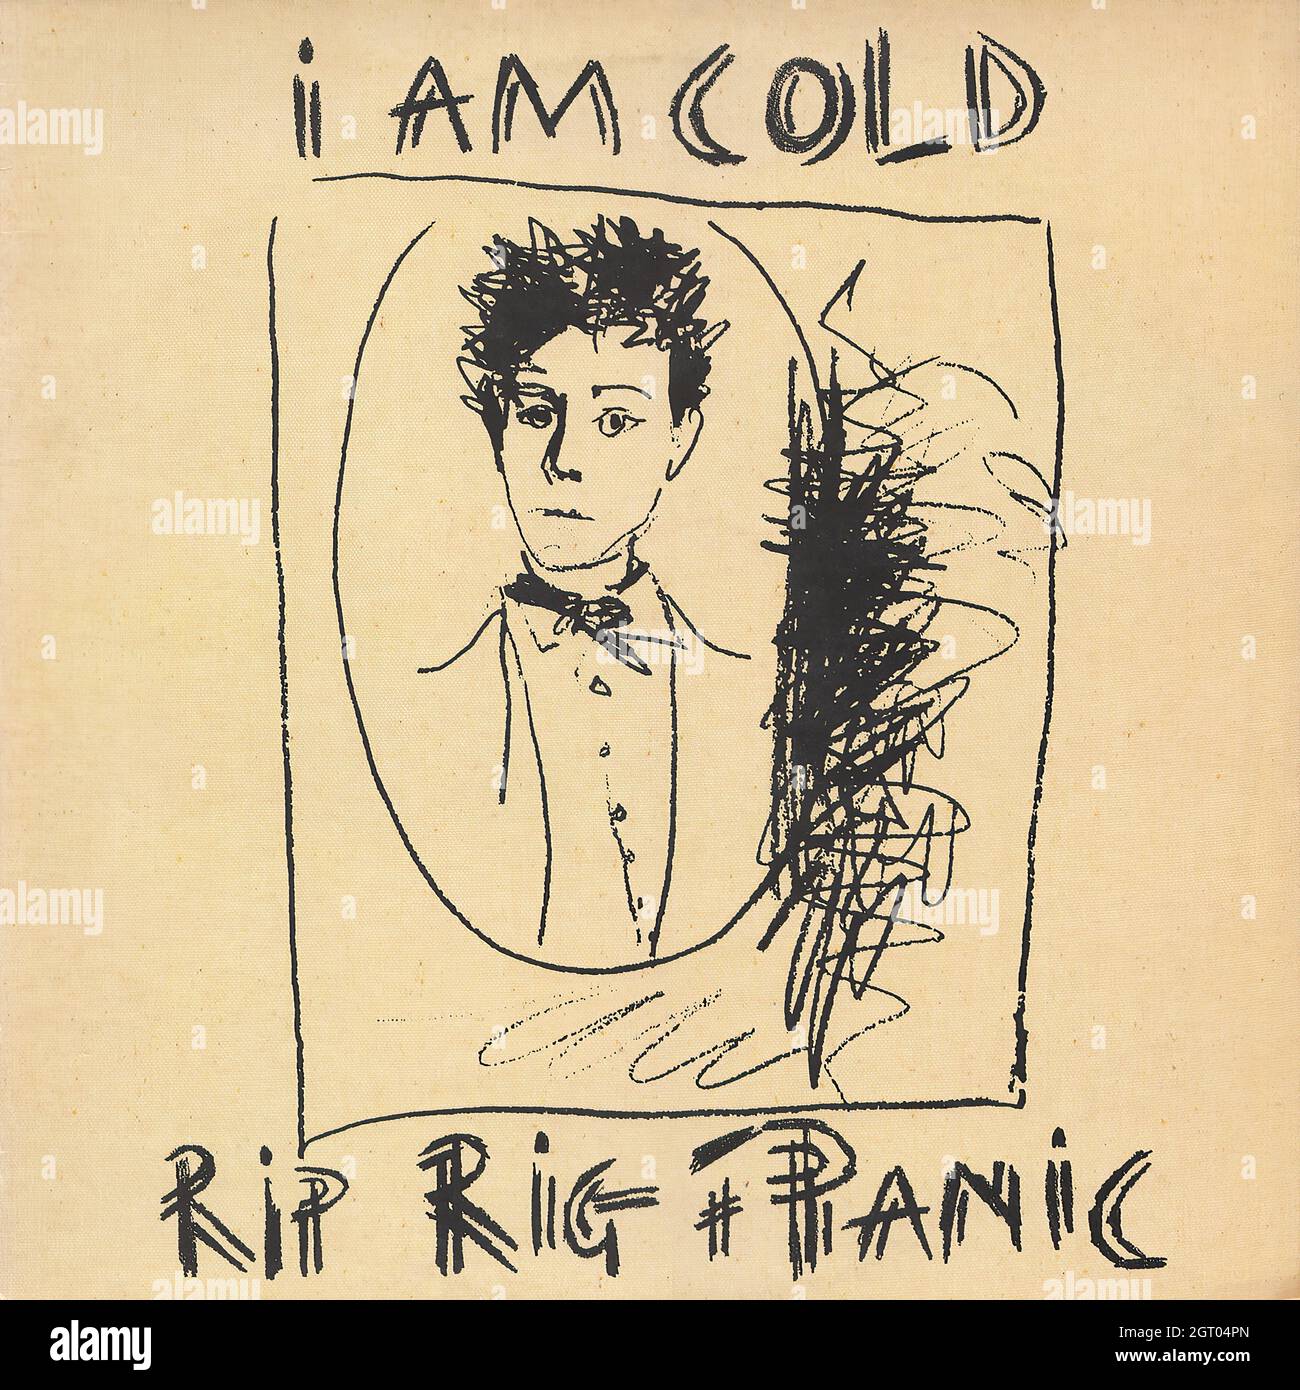 Rip Rig + Panic - I am cold - Vintage Vinyl Record Cover Stock Photo